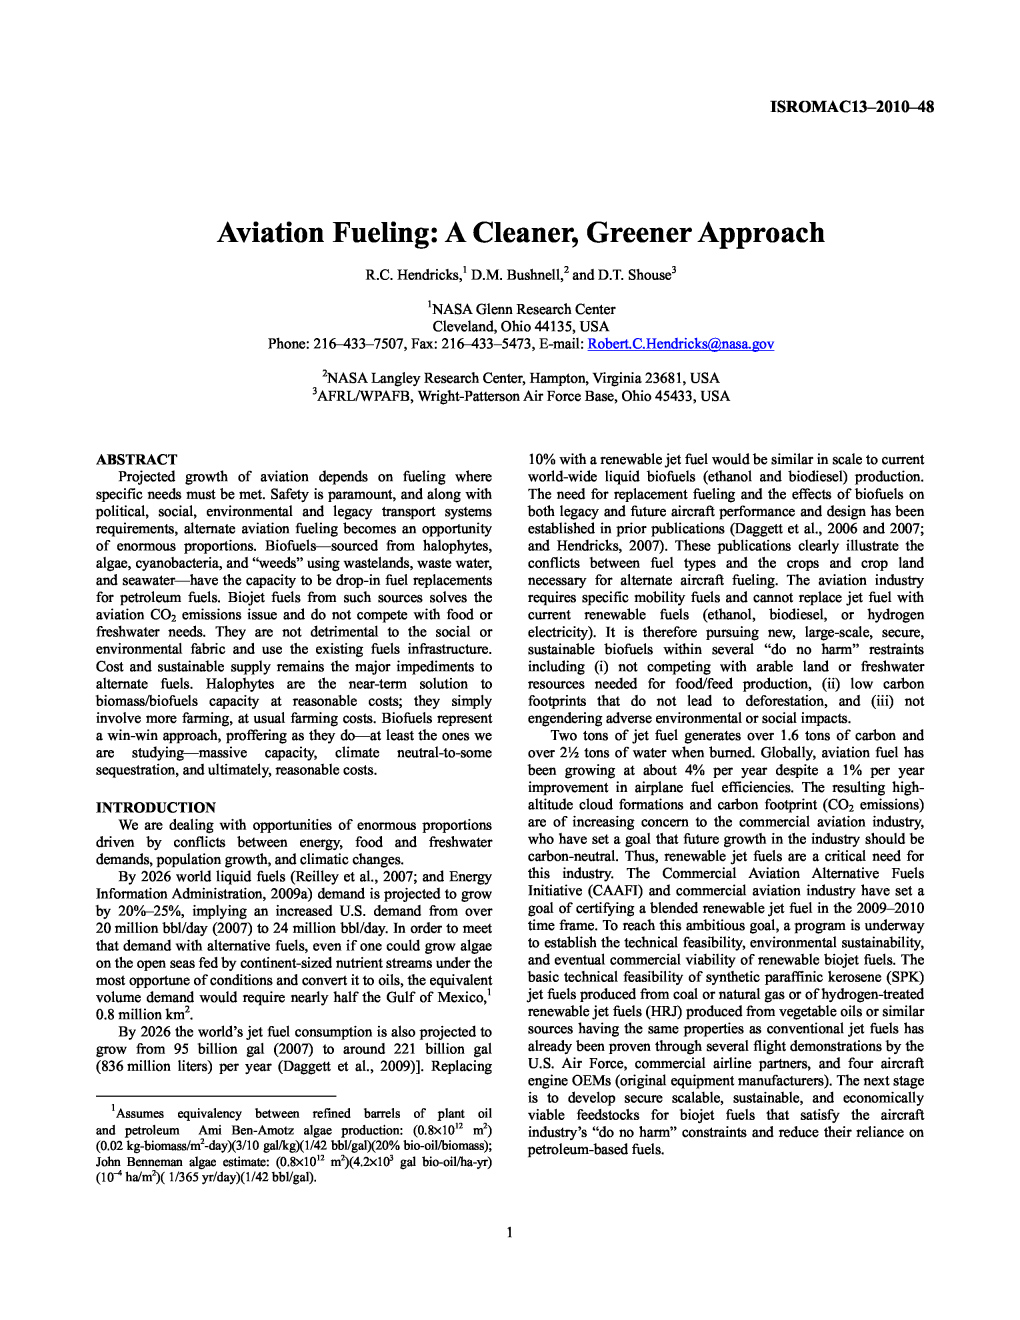 Aviation Fueling: a Cleaner, Greener Approach 1 2 R.C